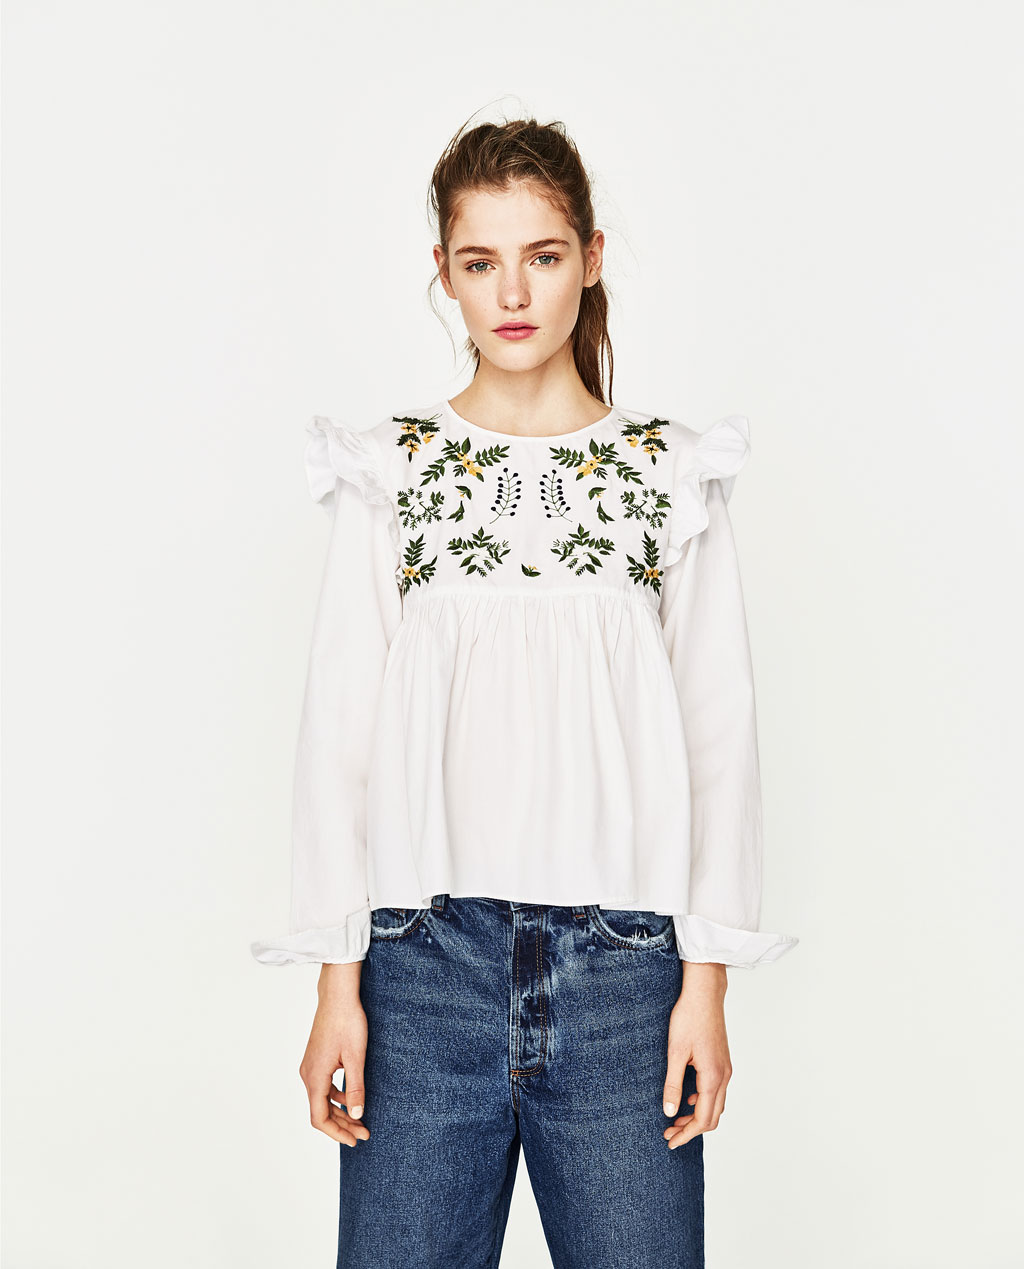 ZARA TRF Collection- Tops – Styled By Bem